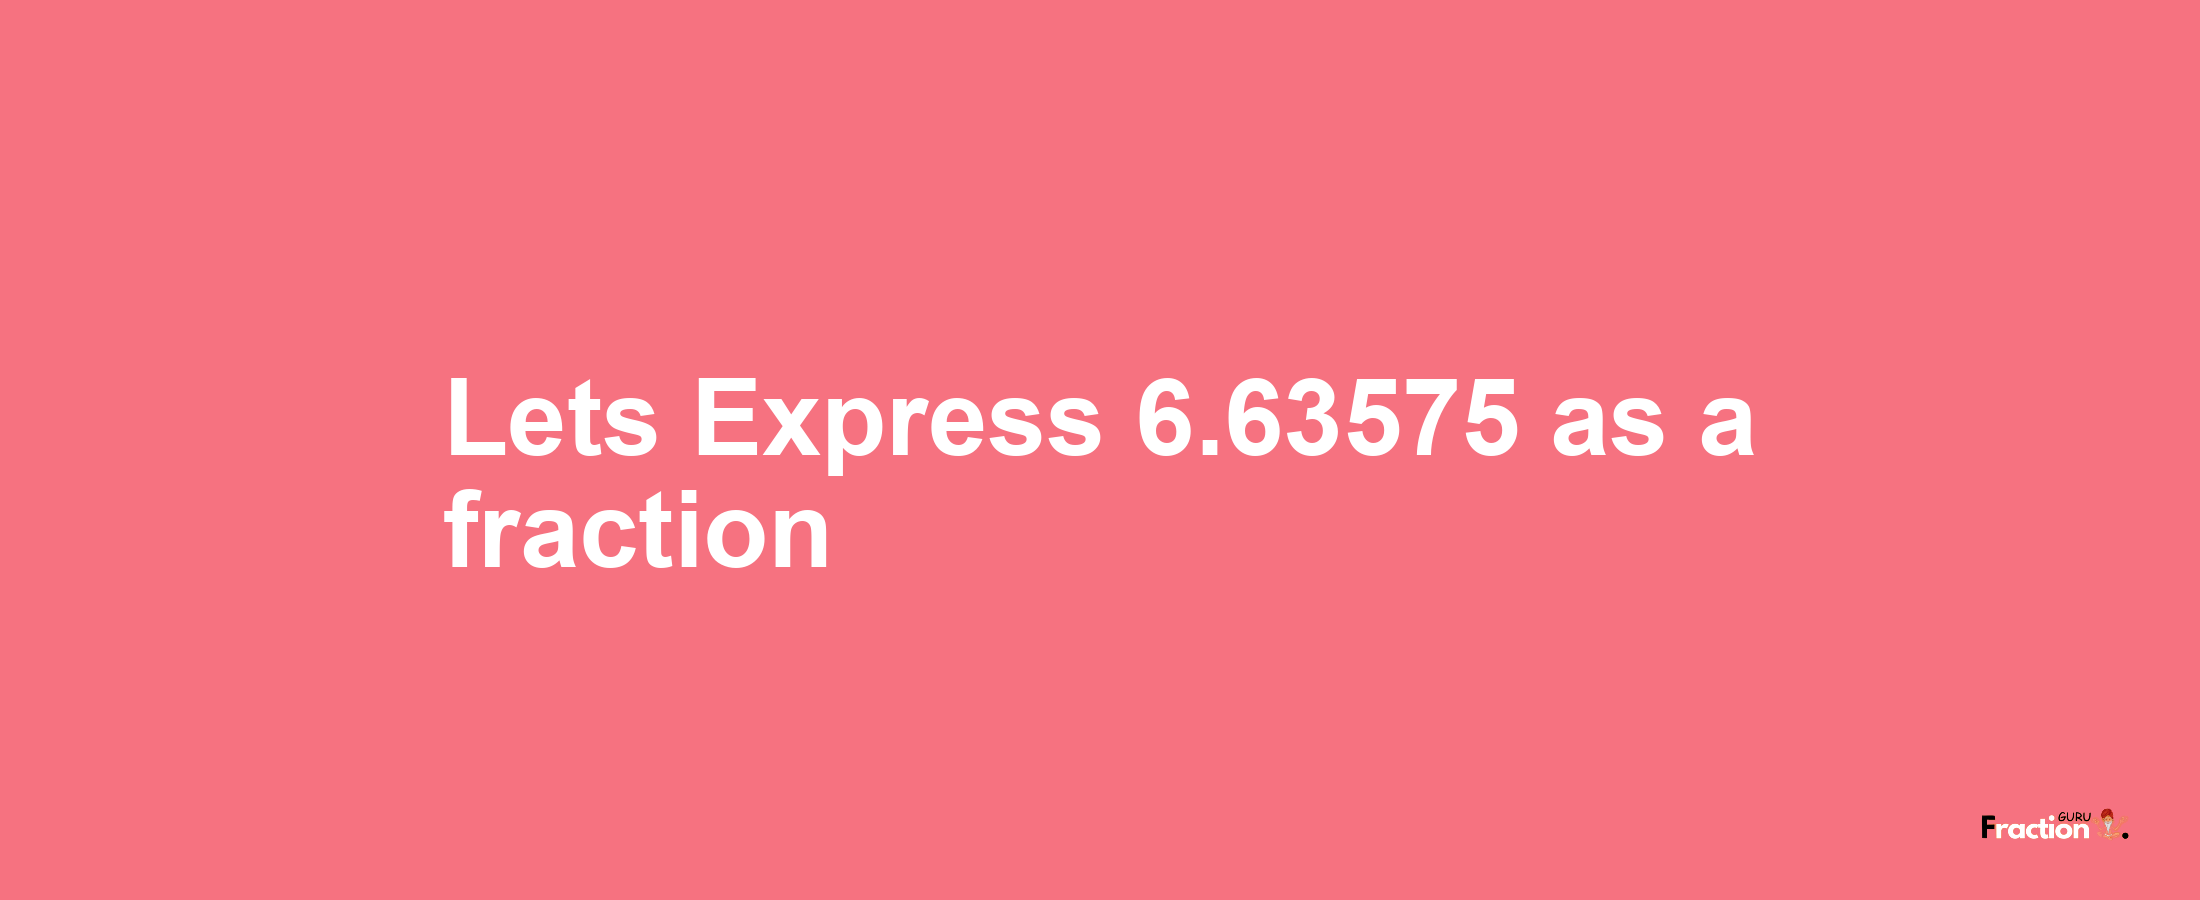 Lets Express 6.63575 as afraction